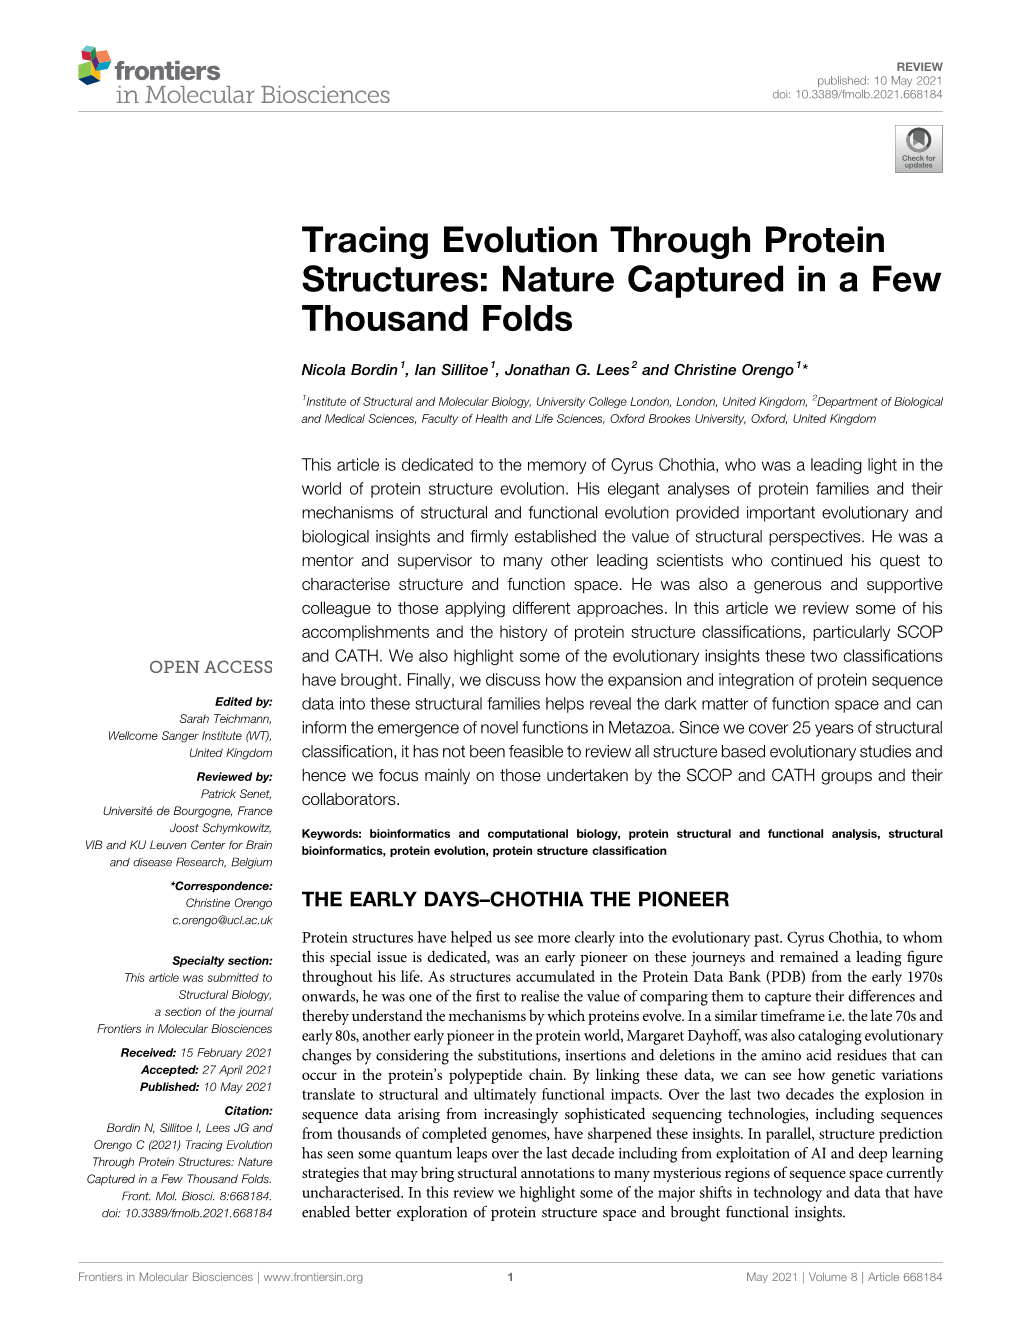 Tracing Evolution Through Protein Structures: Nature Captured in a Few Thousand Folds